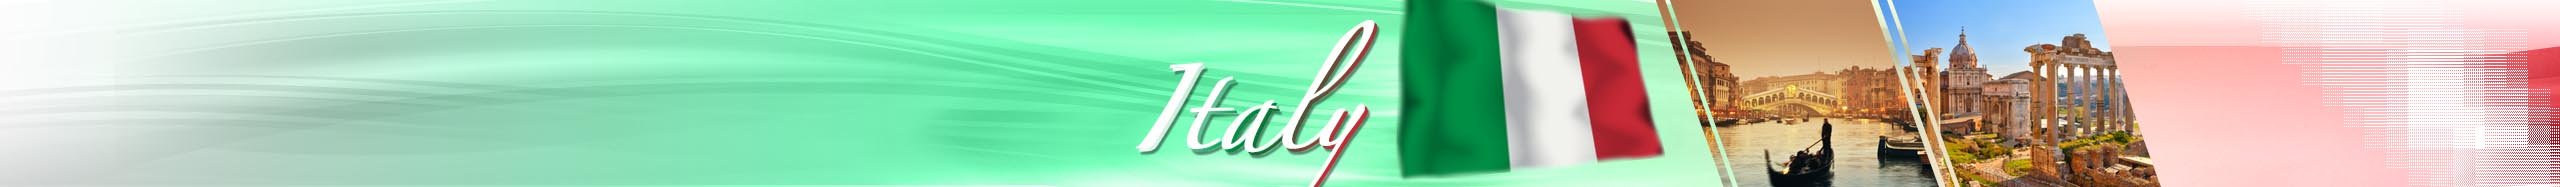 Italy Medical Tourism Image